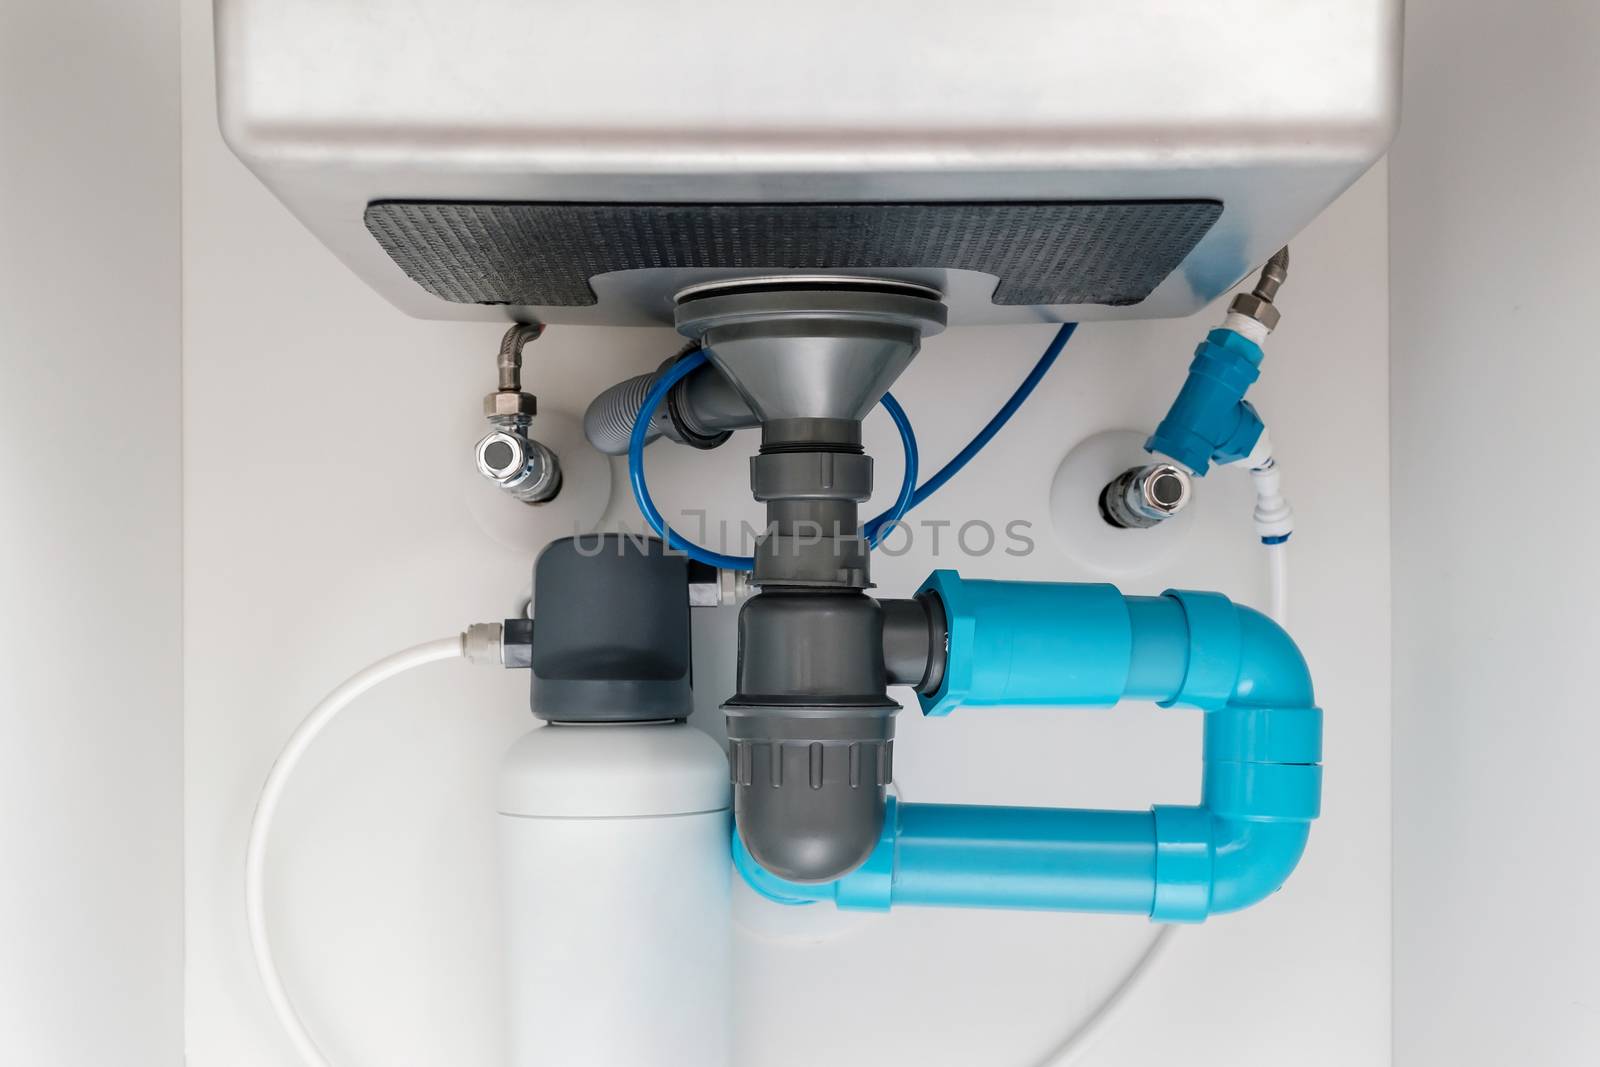 under sink plumbing and drainage system by happycreator